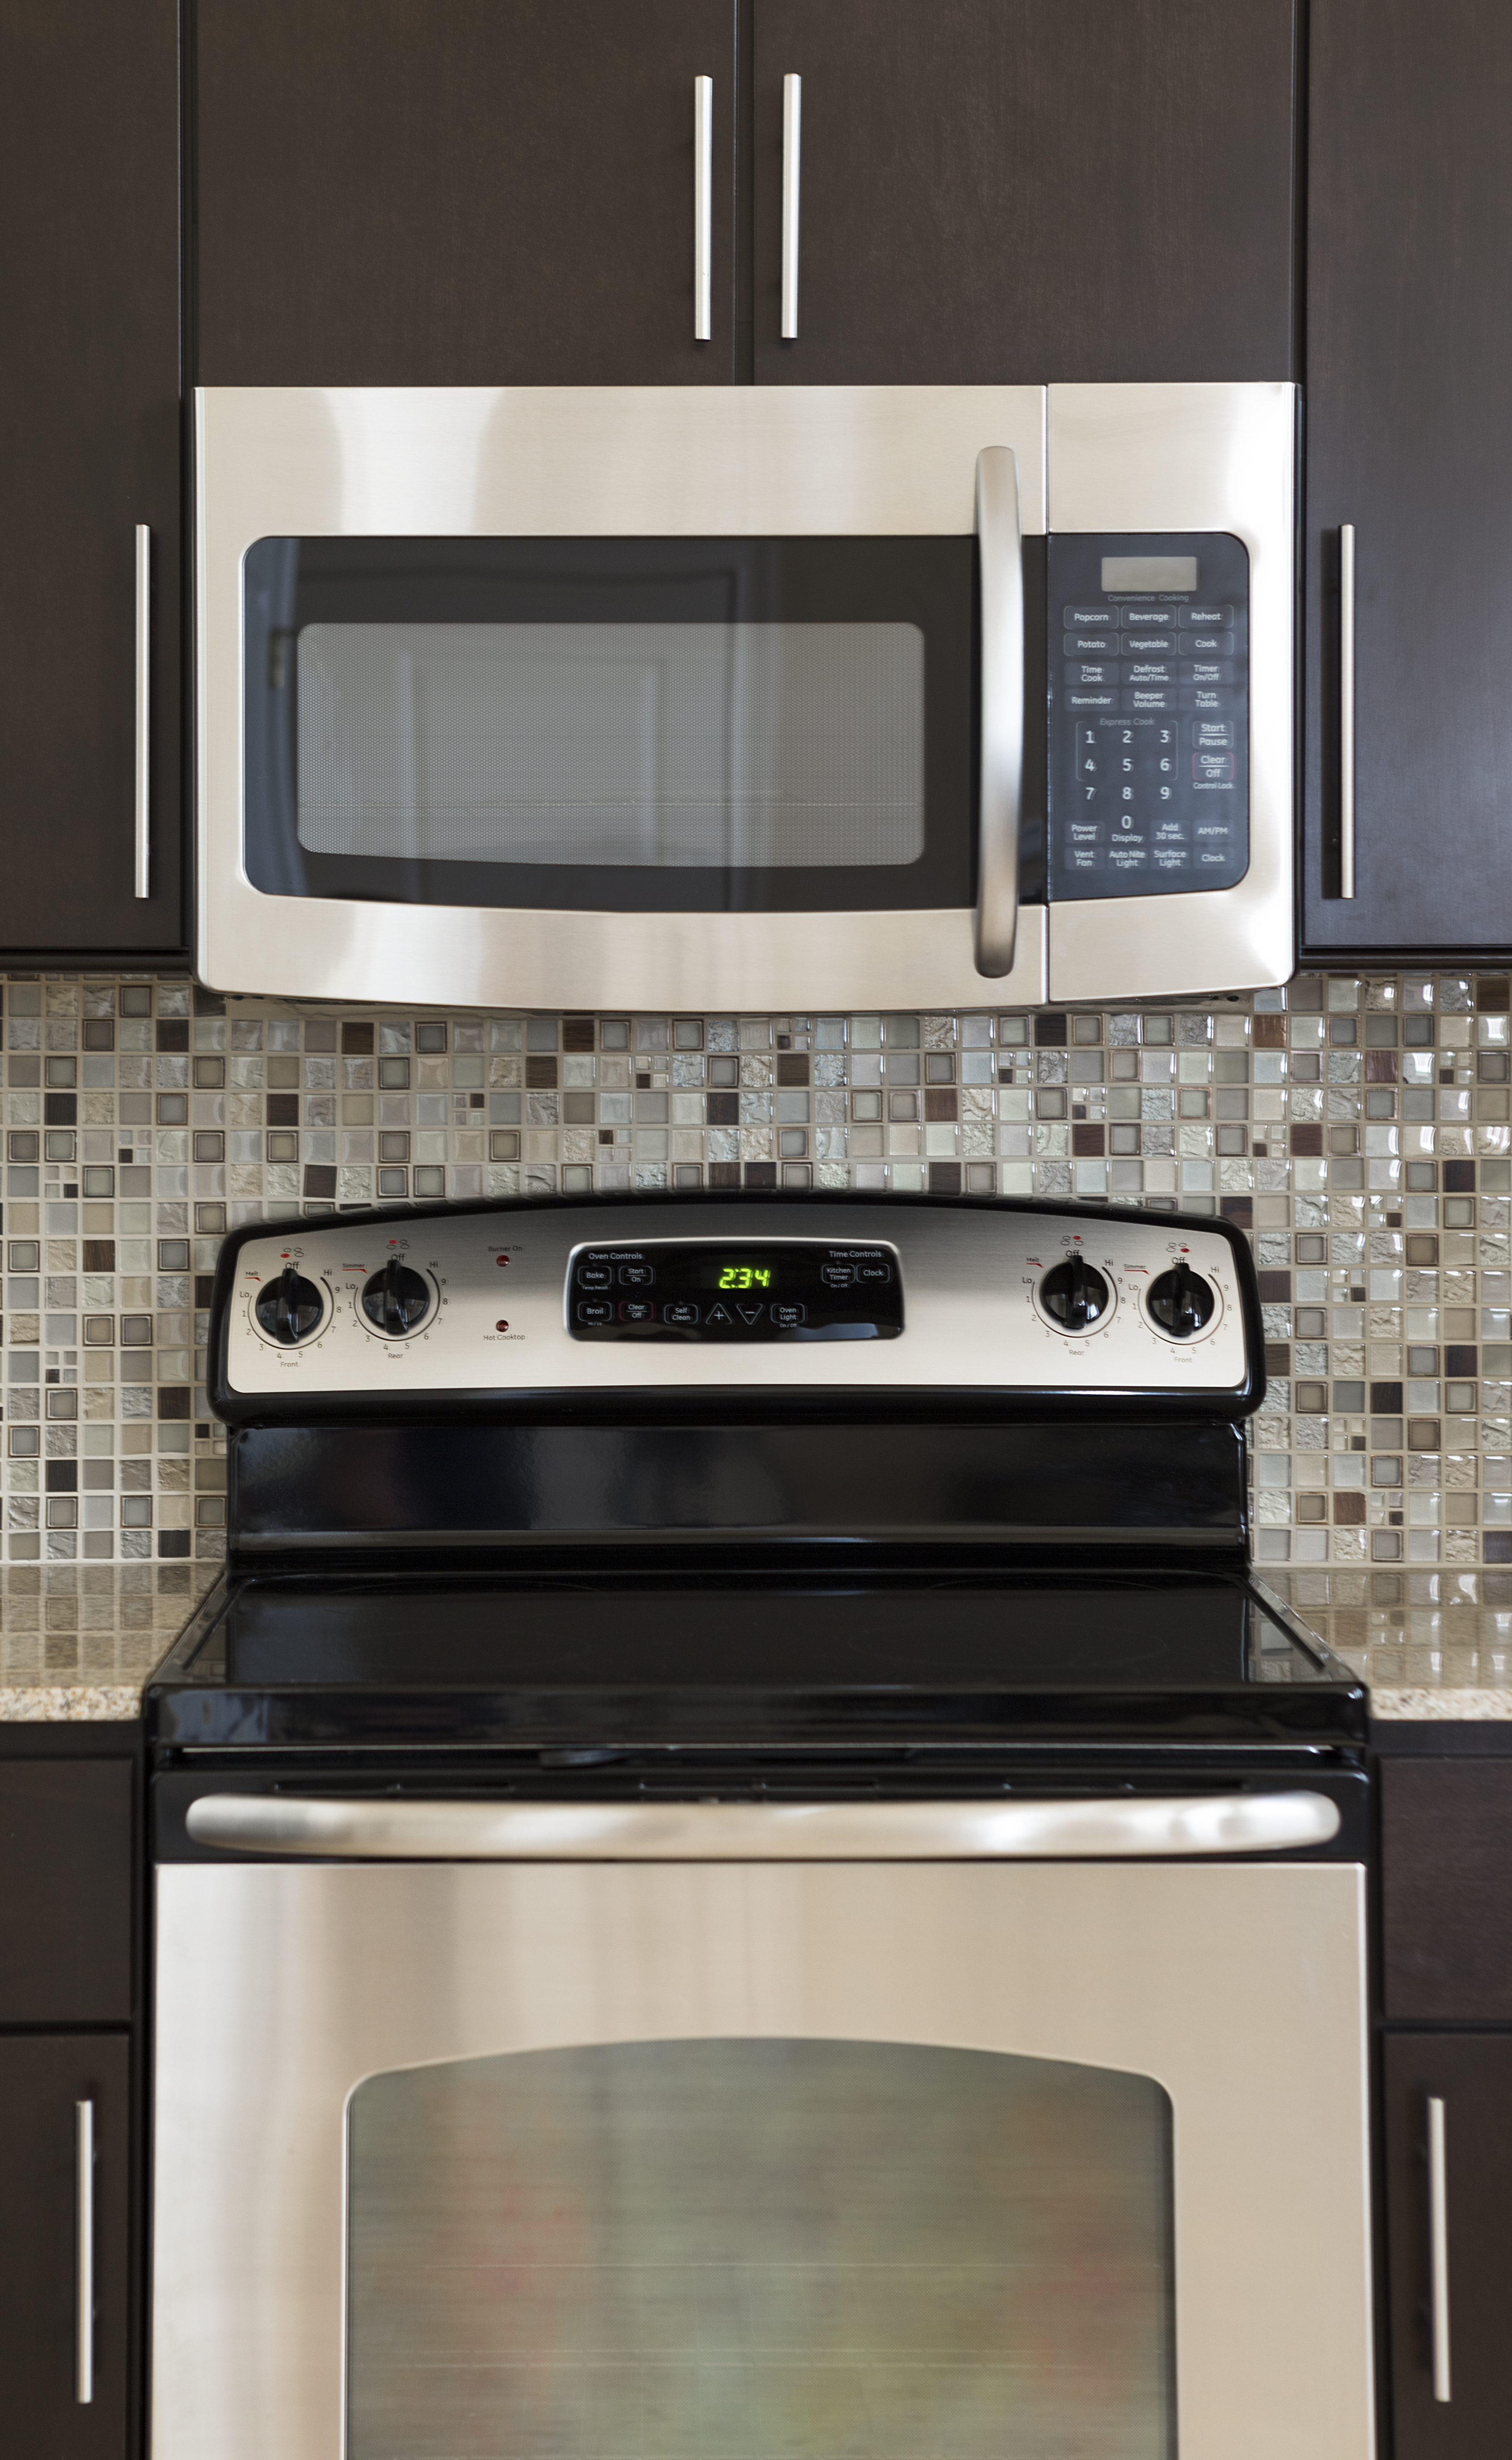 Modern kitchen with microwave above a stove and oven, set against a mosaic backsplash